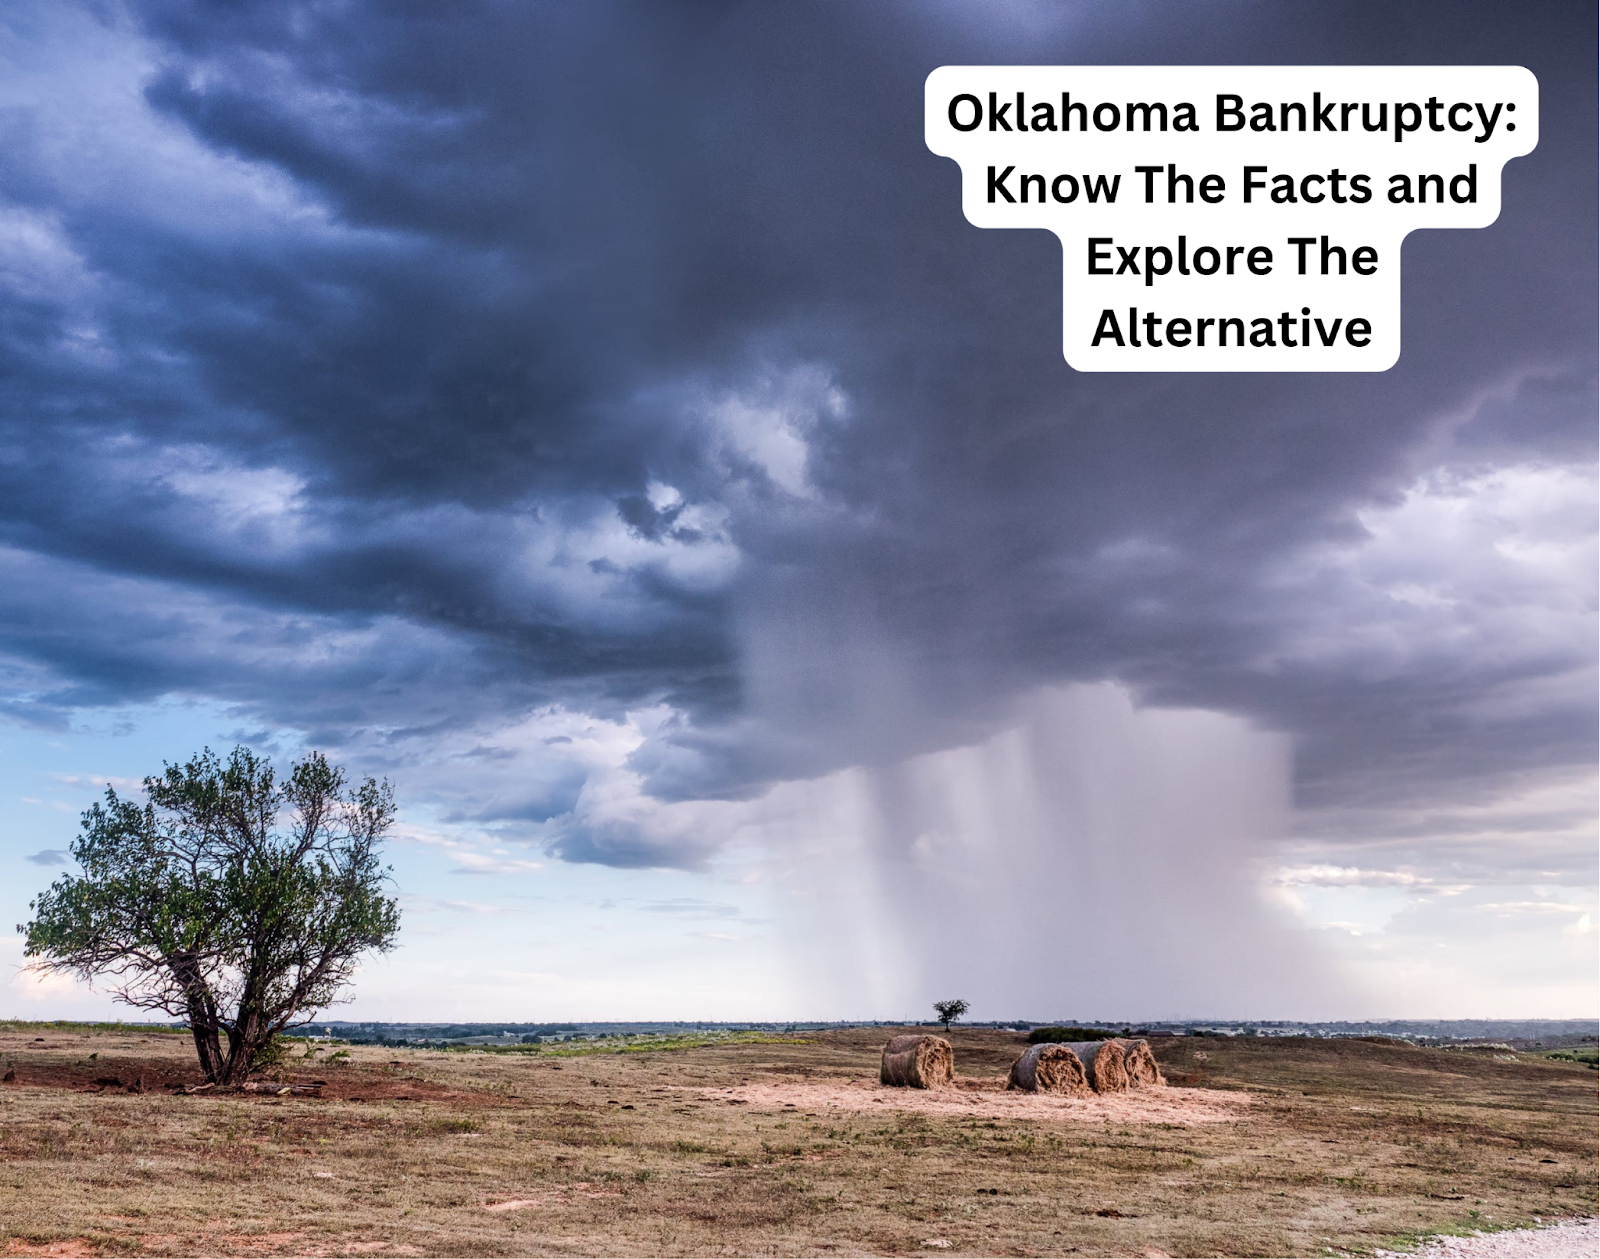 Oklahoma Bankruptcy: Know The Facts and Explore The Alternative